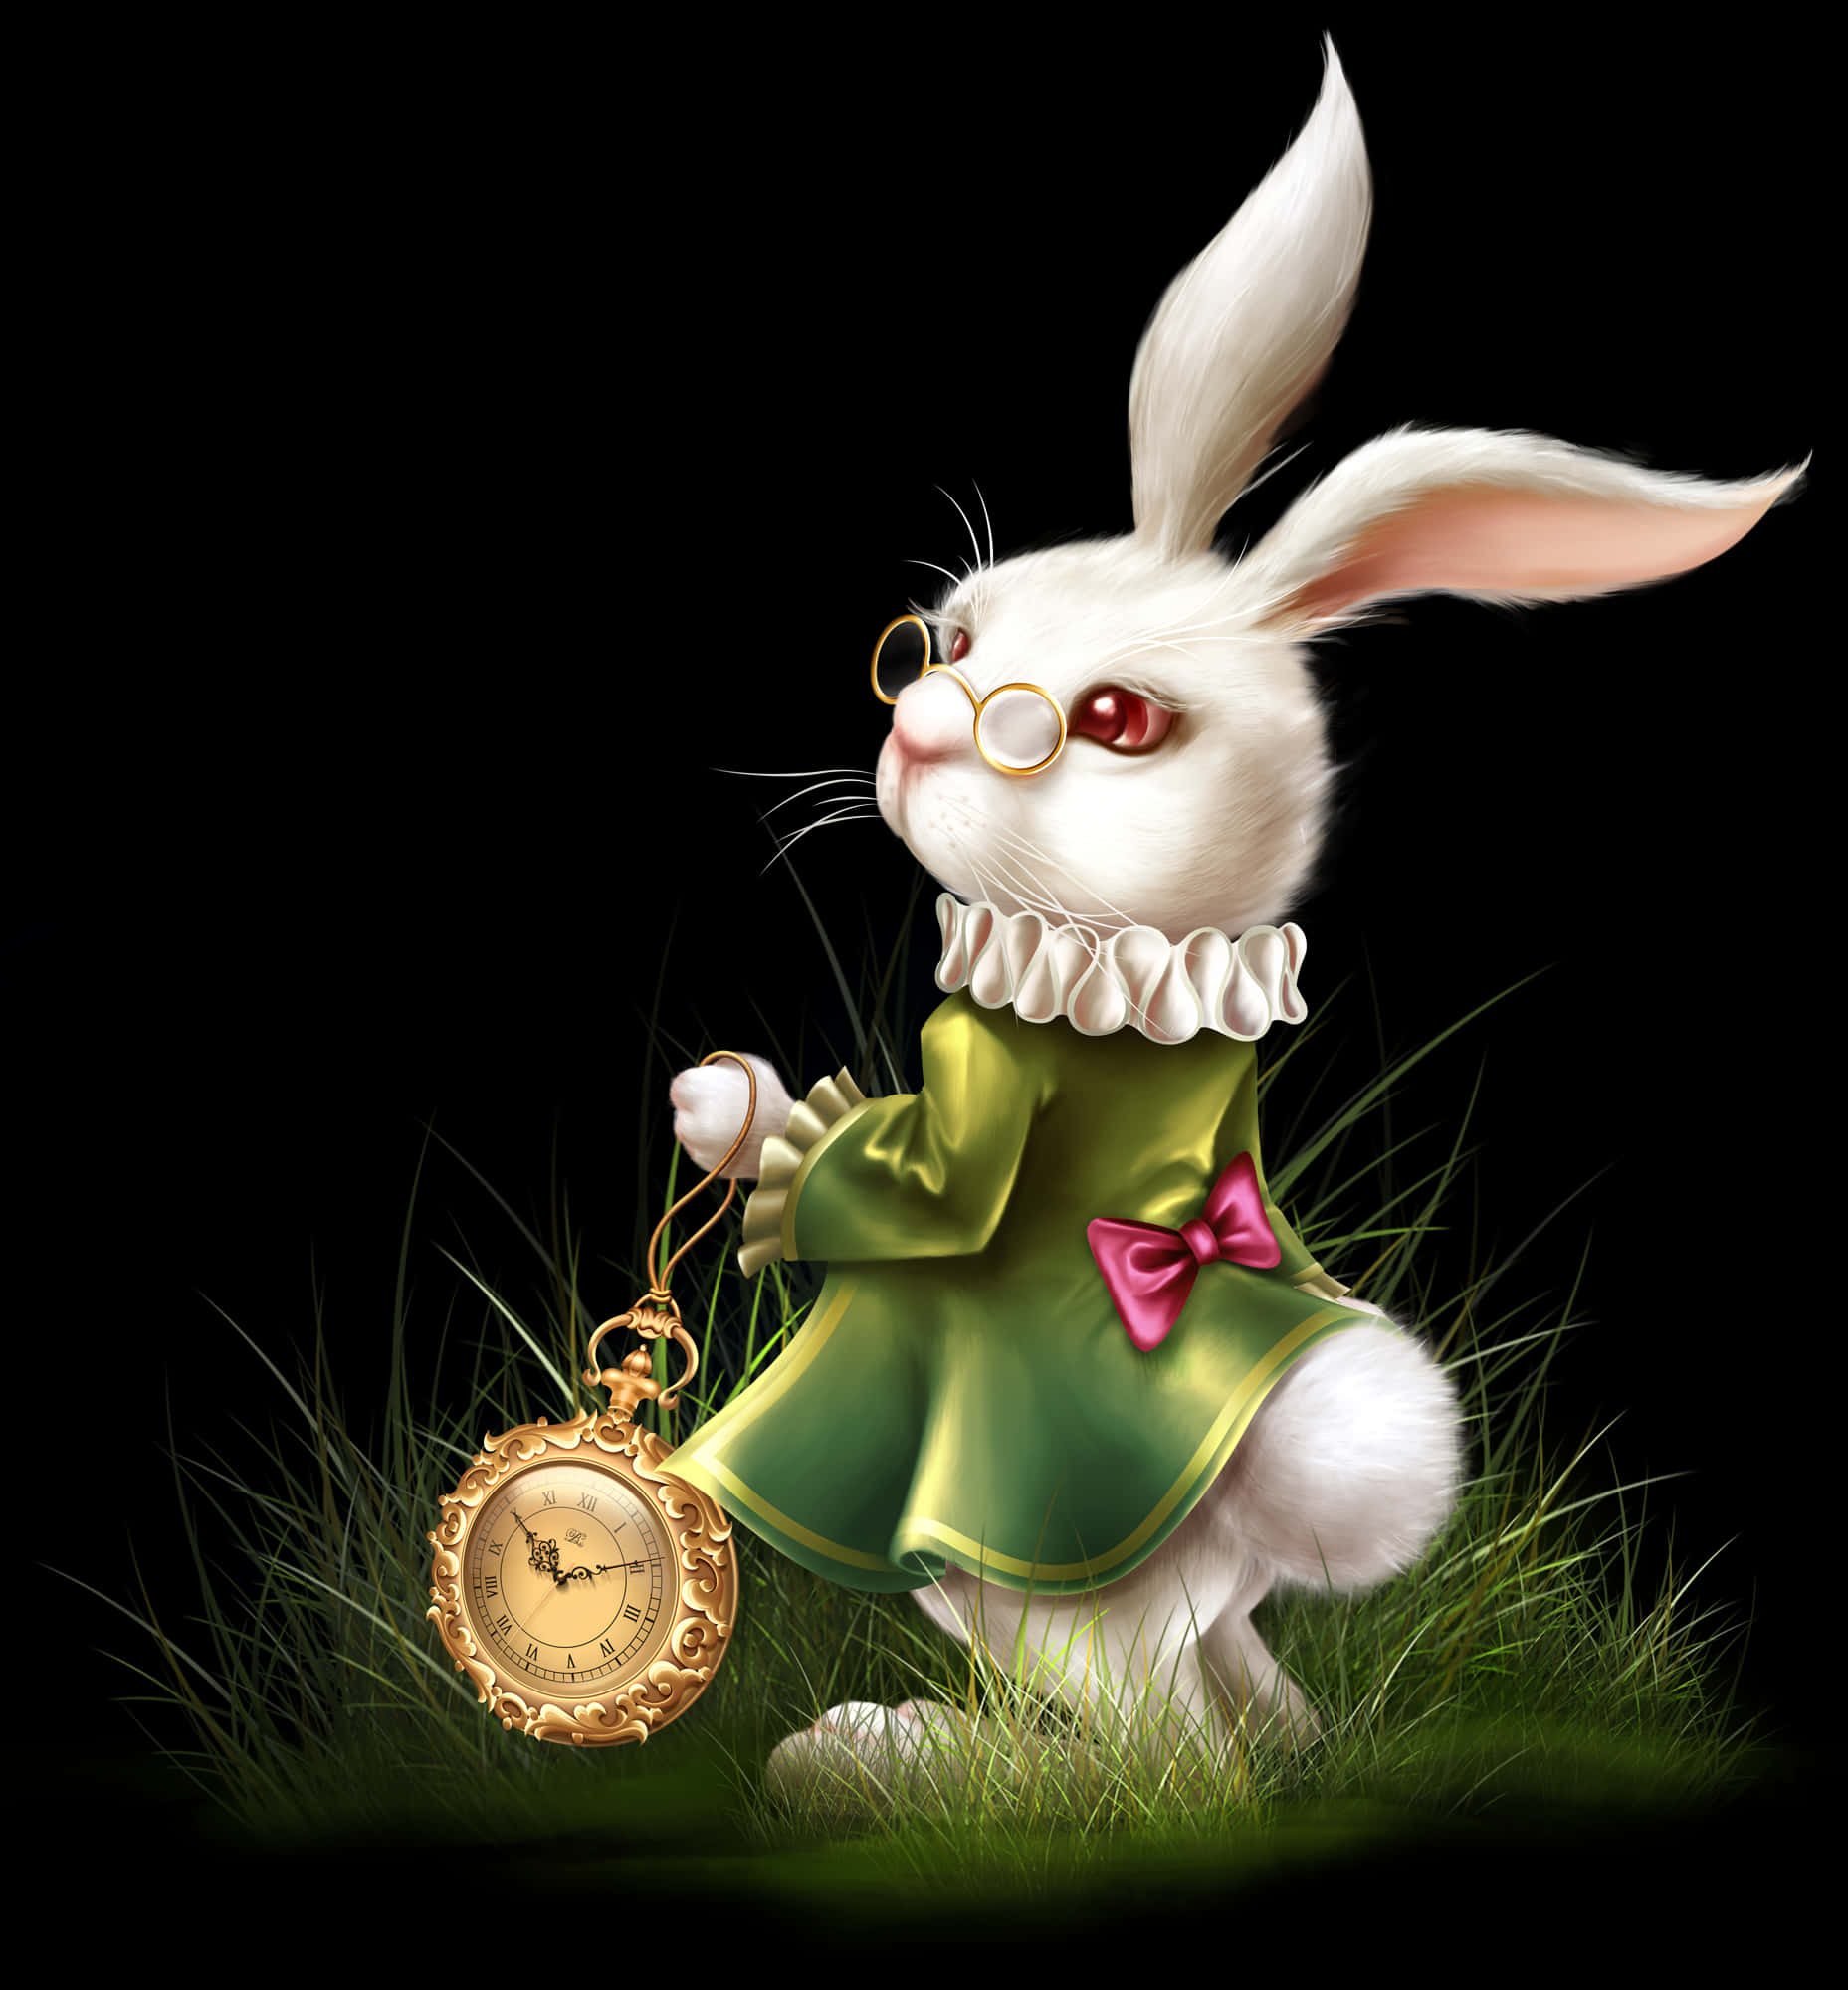 A White Rabbit Holding A Clock